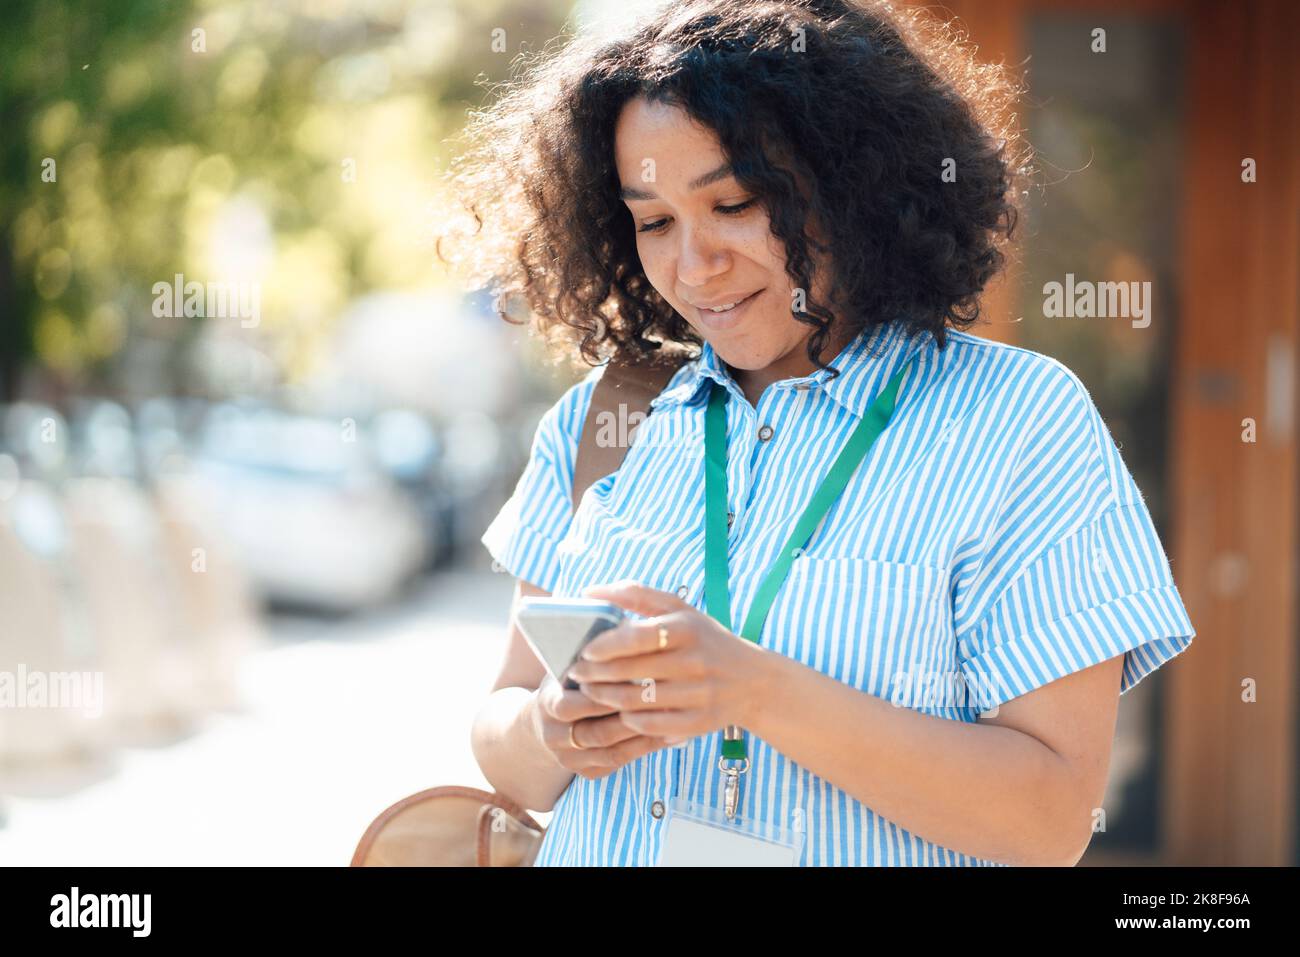 Businesswoman with ID card using smart phone Stock Photo